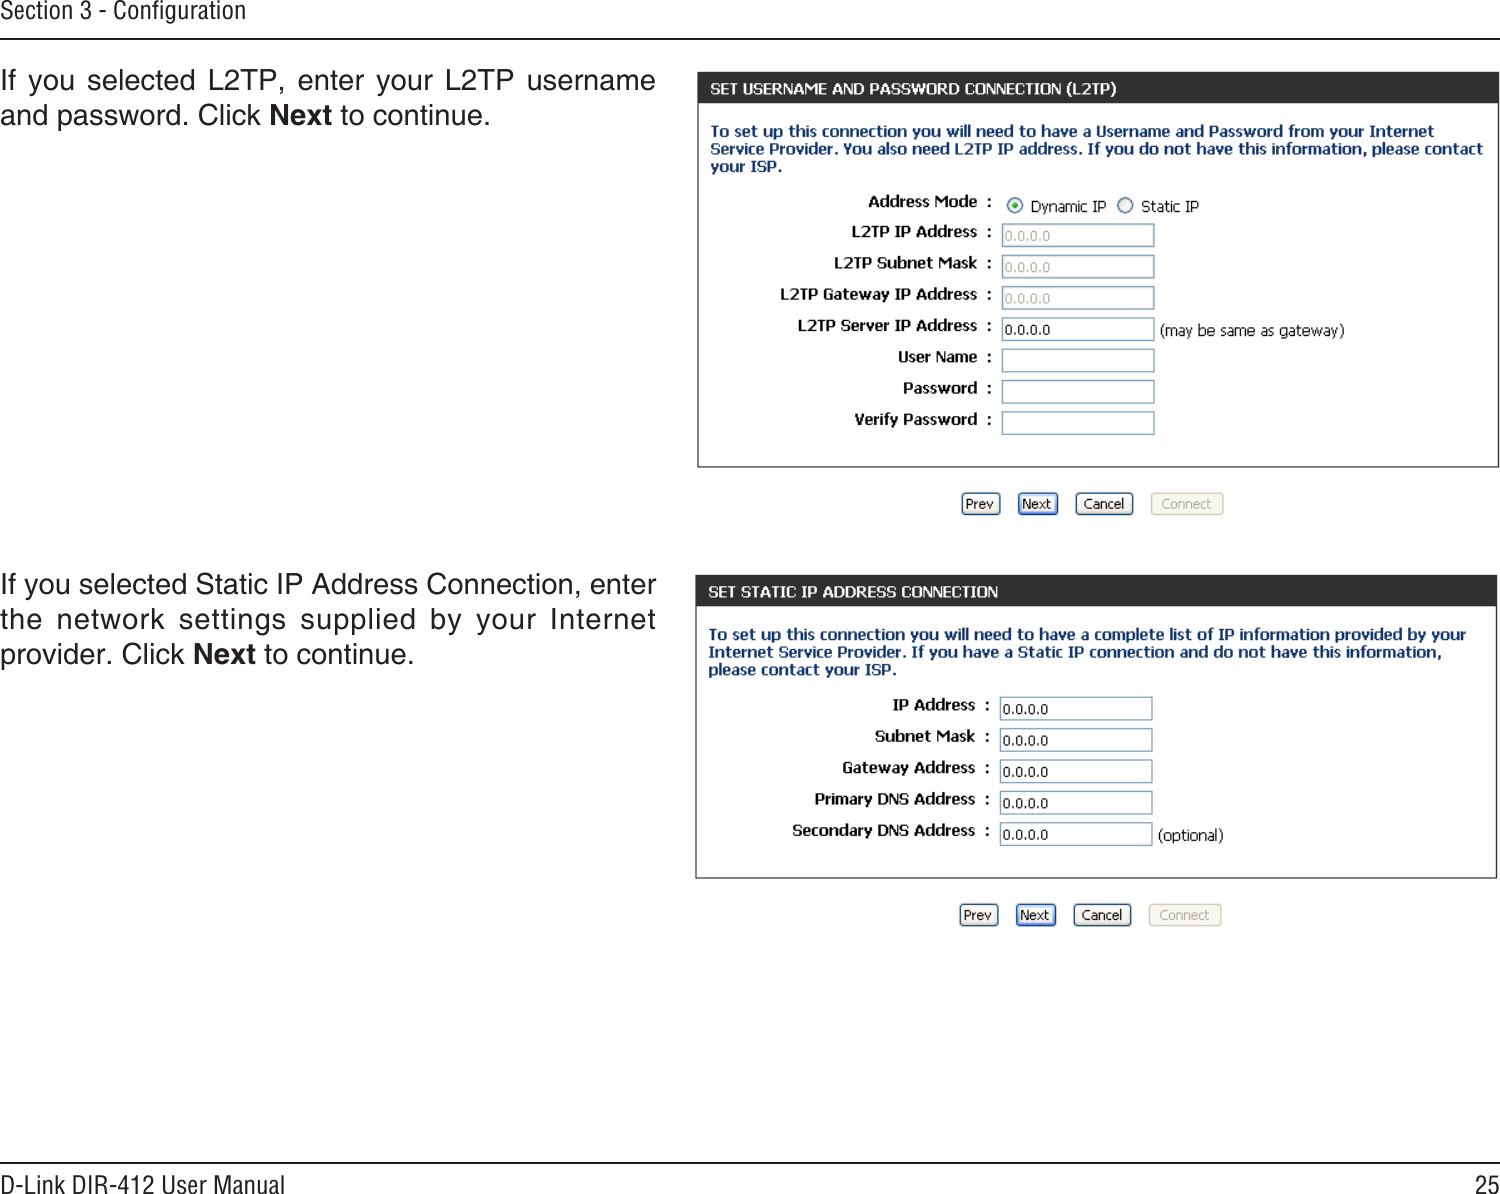 25D-Link DIR-412 User ManualSection 3 - ConﬁgurationIf  you  selected  L2TP,  enter  your  L2TP  username and password. Click Next to continue.If you selected Static IP Address Connection, enter the  network  settings  supplied  by  your  Internet provider. Click Next to continue.